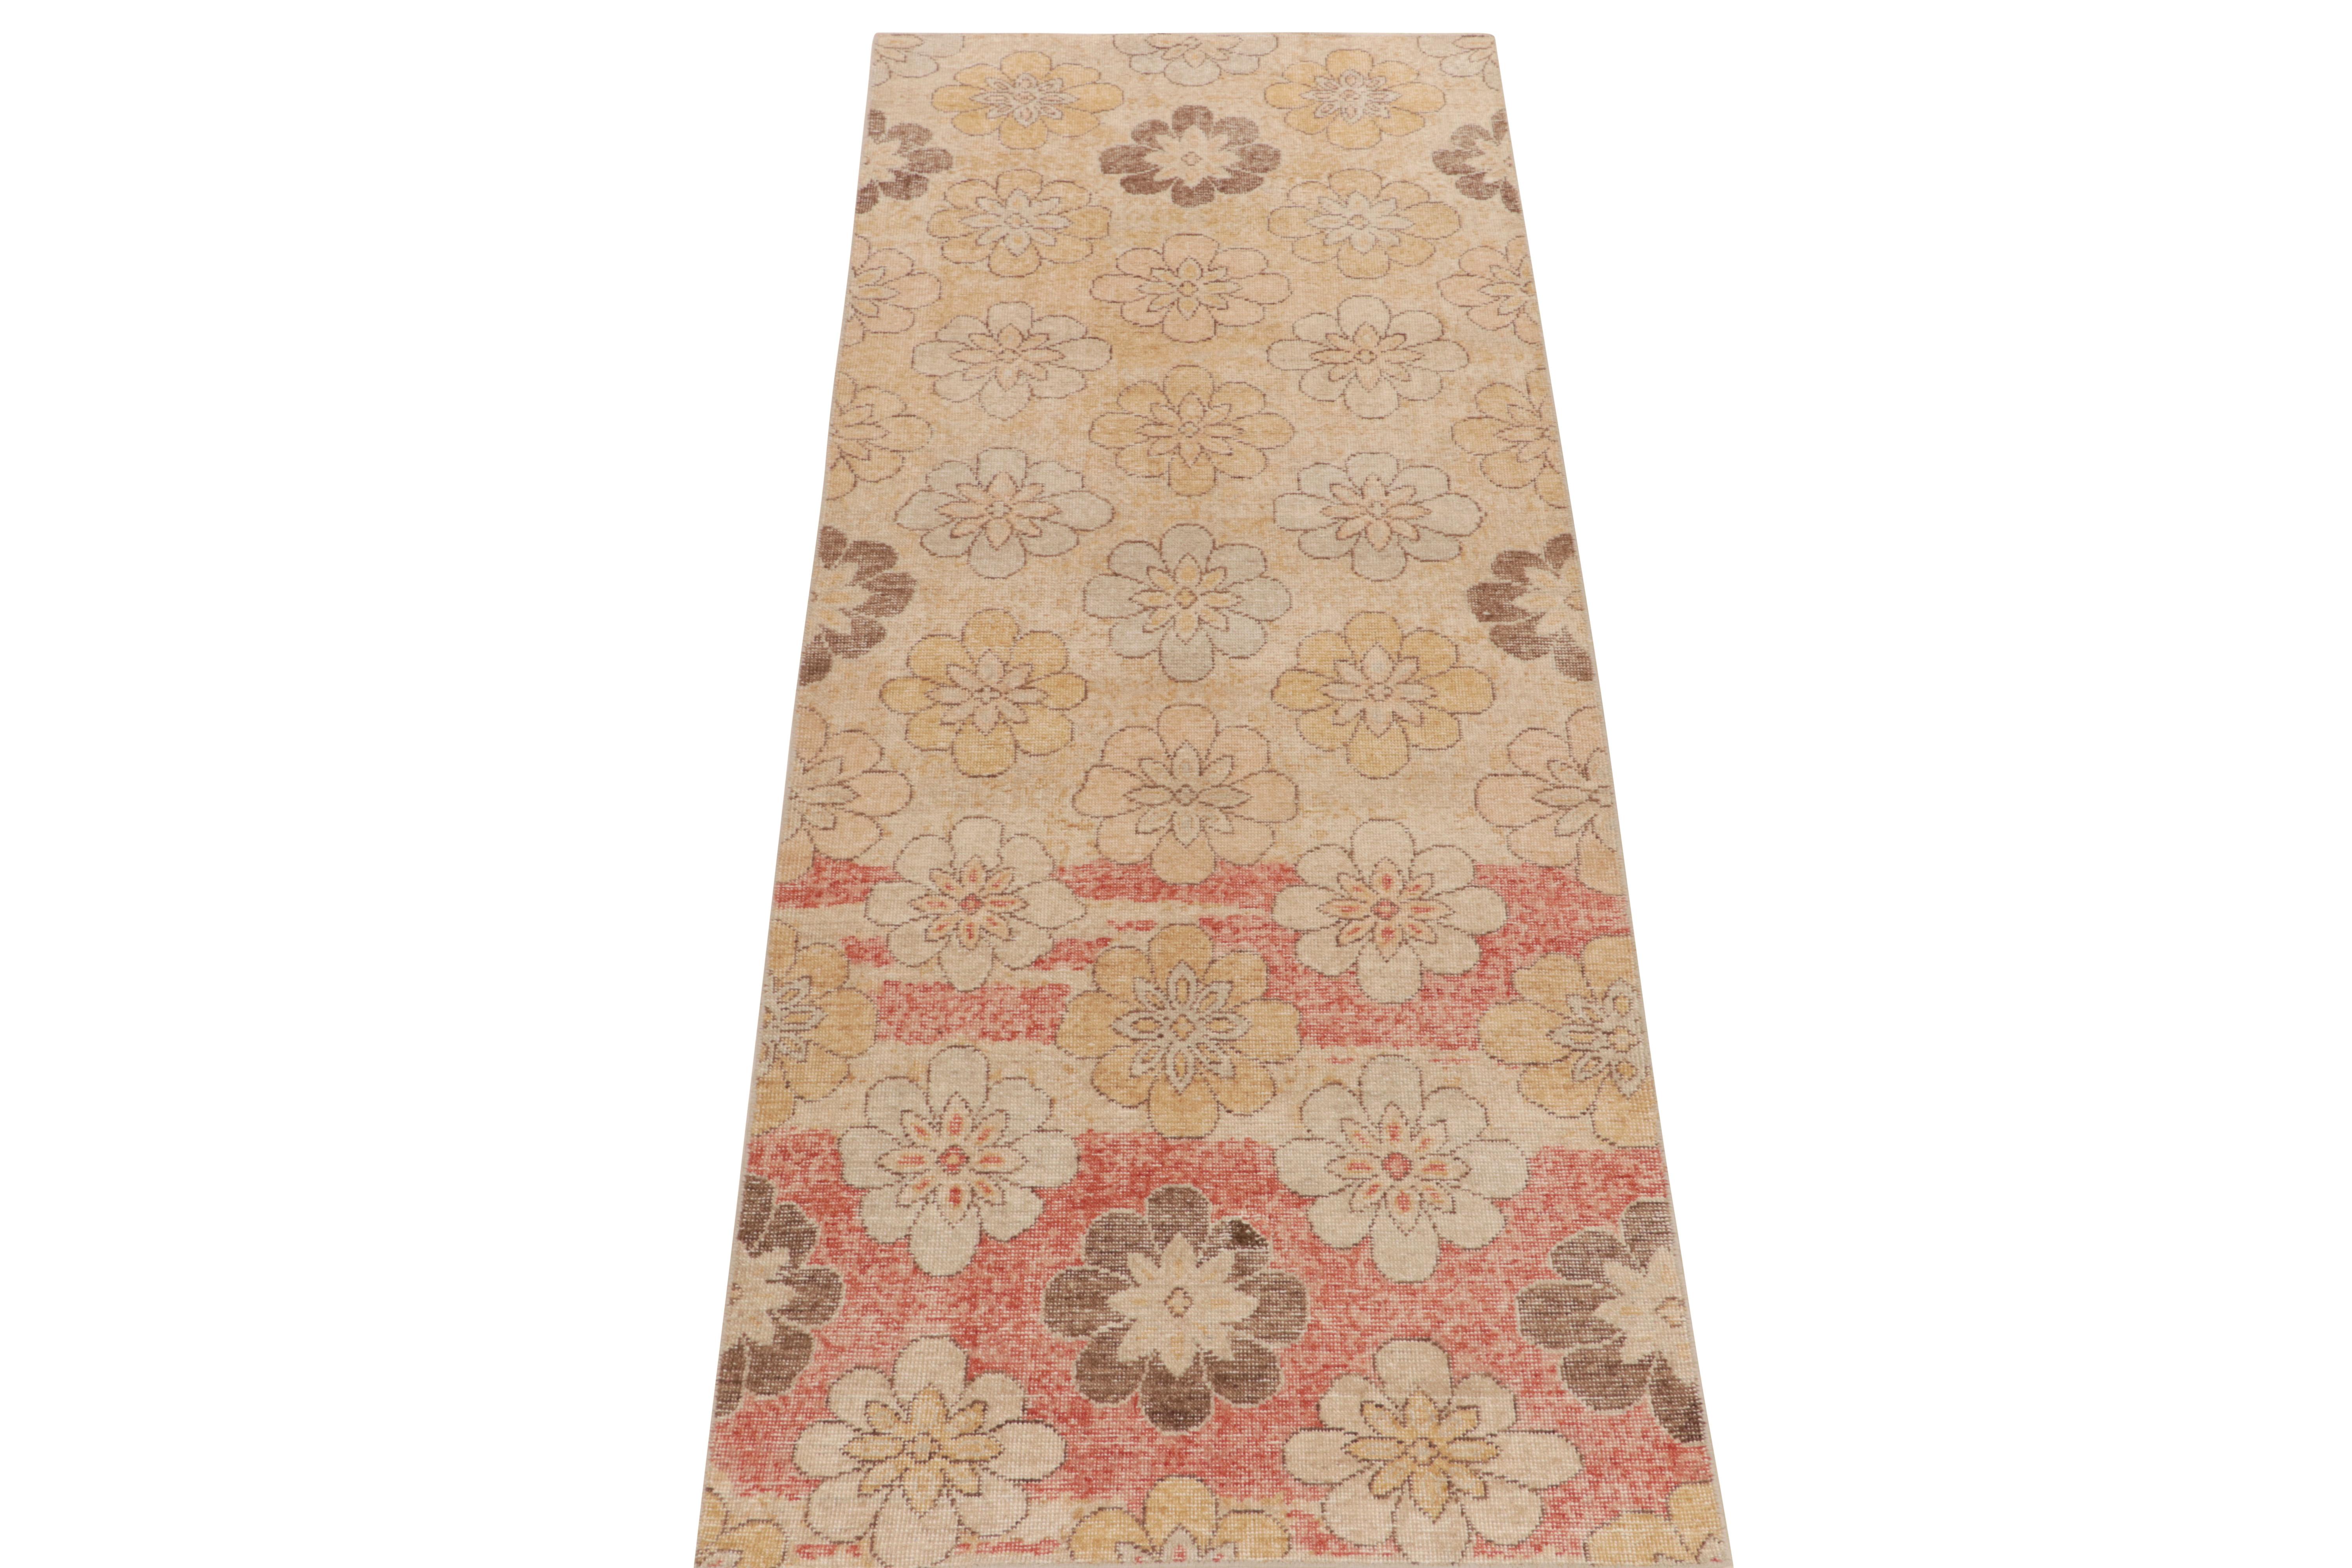 A warm 4x10 distressed style rug from our Homage Collection, inspired by the passionate works of a bold Turkish designer in mid century modern aesthetics. The all over floral pattern enjoys the warmth of gorgeous red, beige, gold & chocolate brown